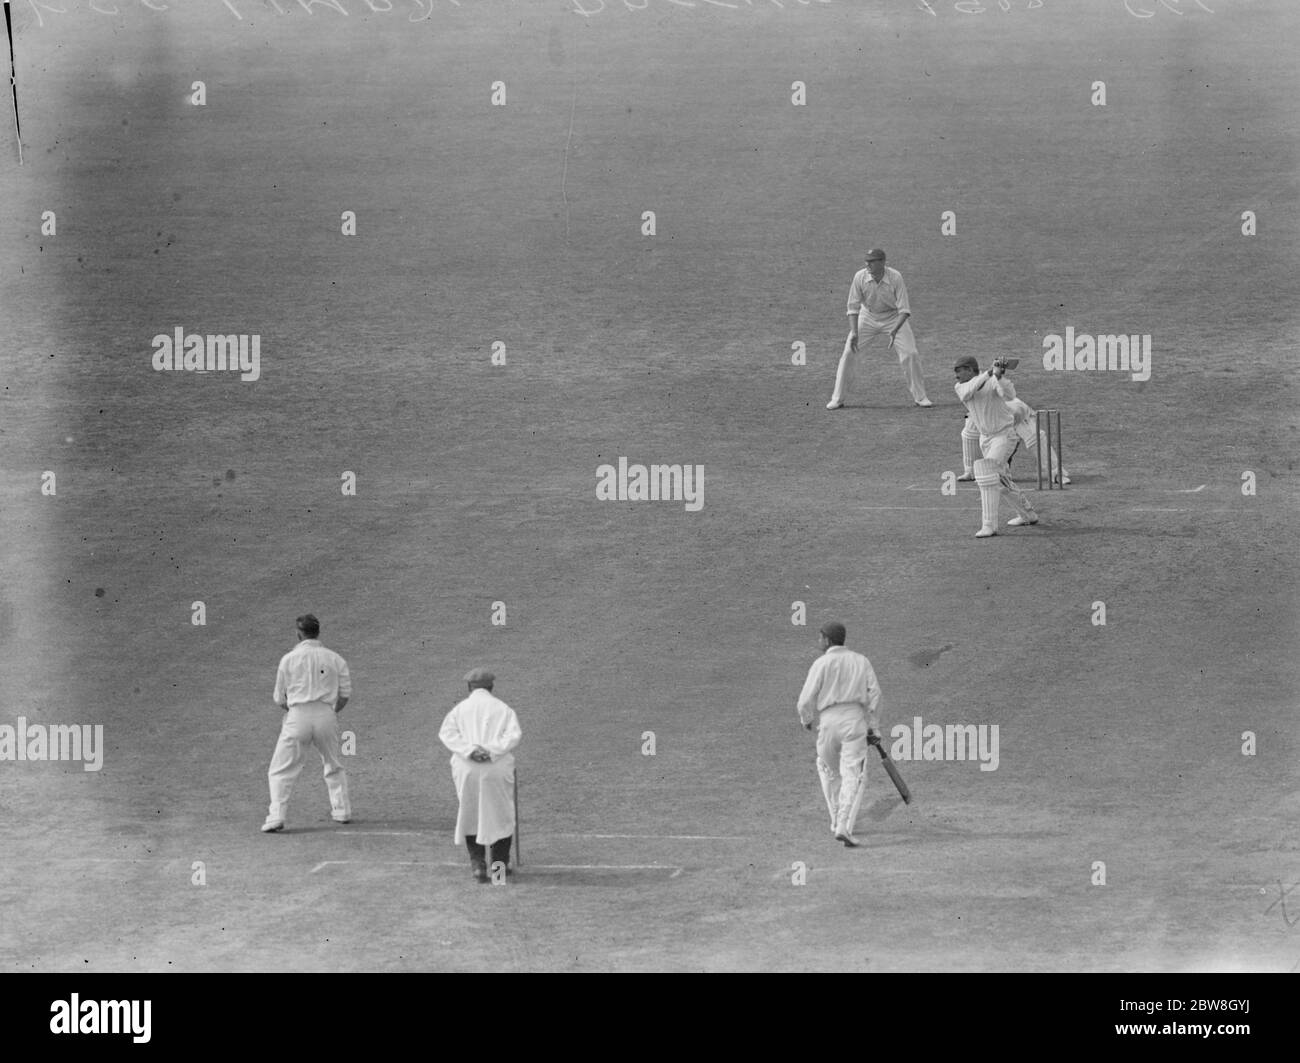 Surrey versus All India at the Oval . K S G Limbdi , who captained the Indians , and made 43 runs , by hard hitting , driving Gregory to the rails . 16 August 1932 Stock Photo